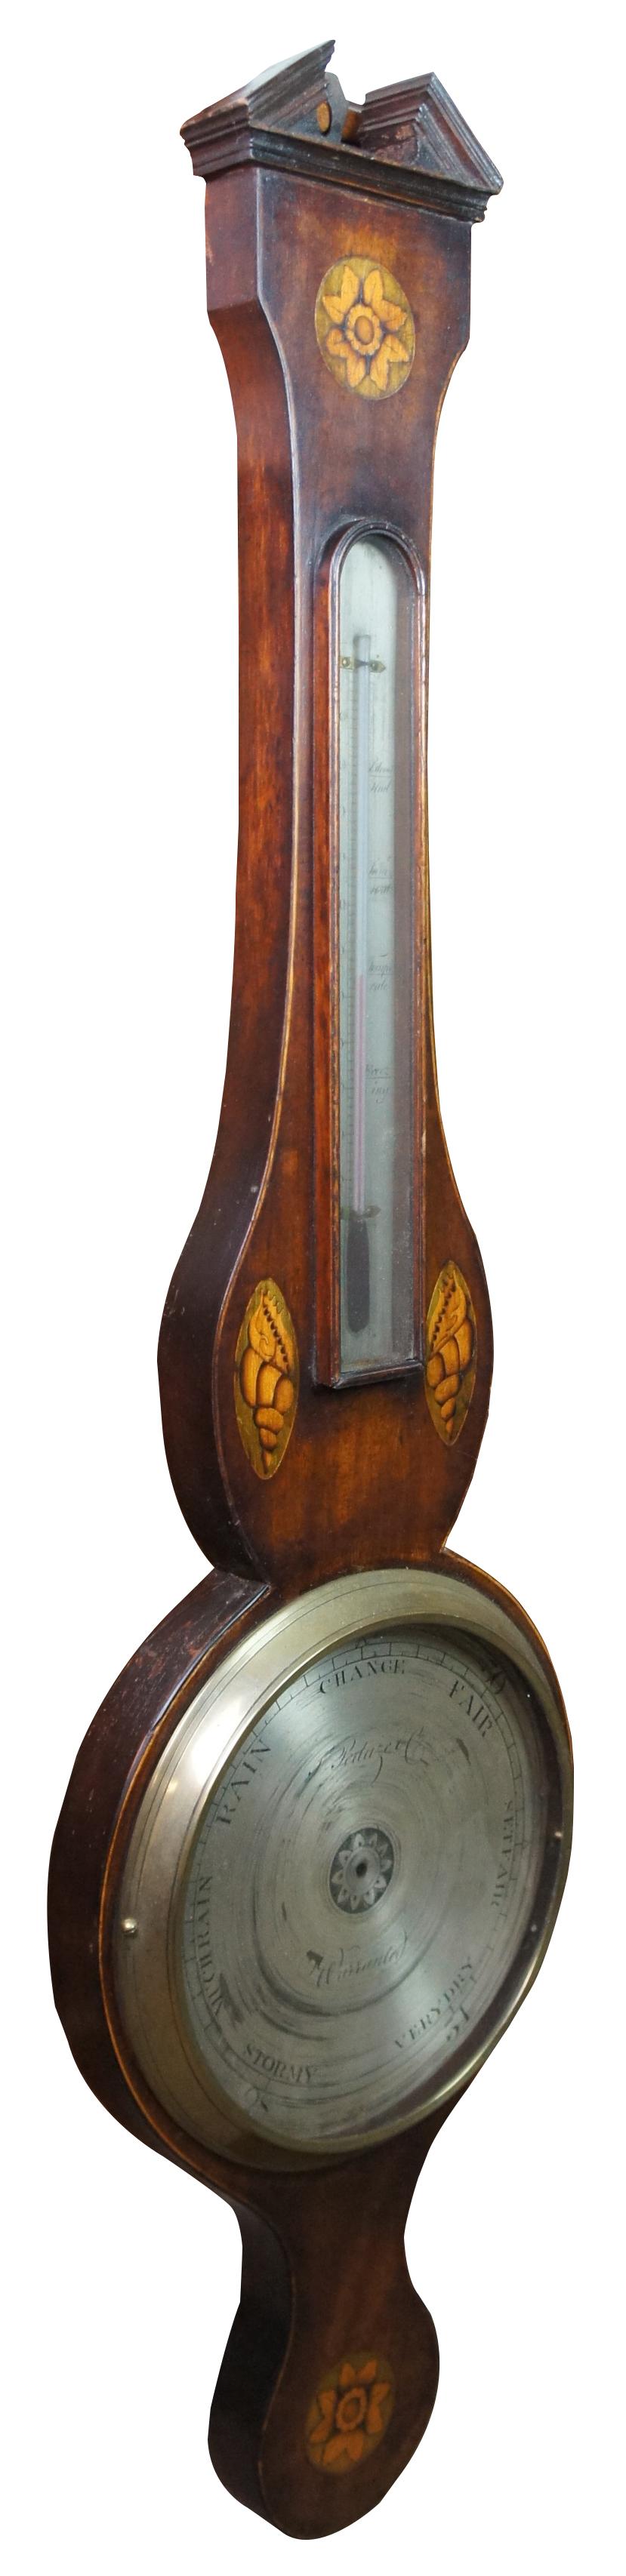 Antique English George III fruitwood barometer featuring a banjo shape with open pediment and inliad satinwood sea shell and floral motif. Made by F. Peduze Co. Circa 1780s-1820s. Measures: 38